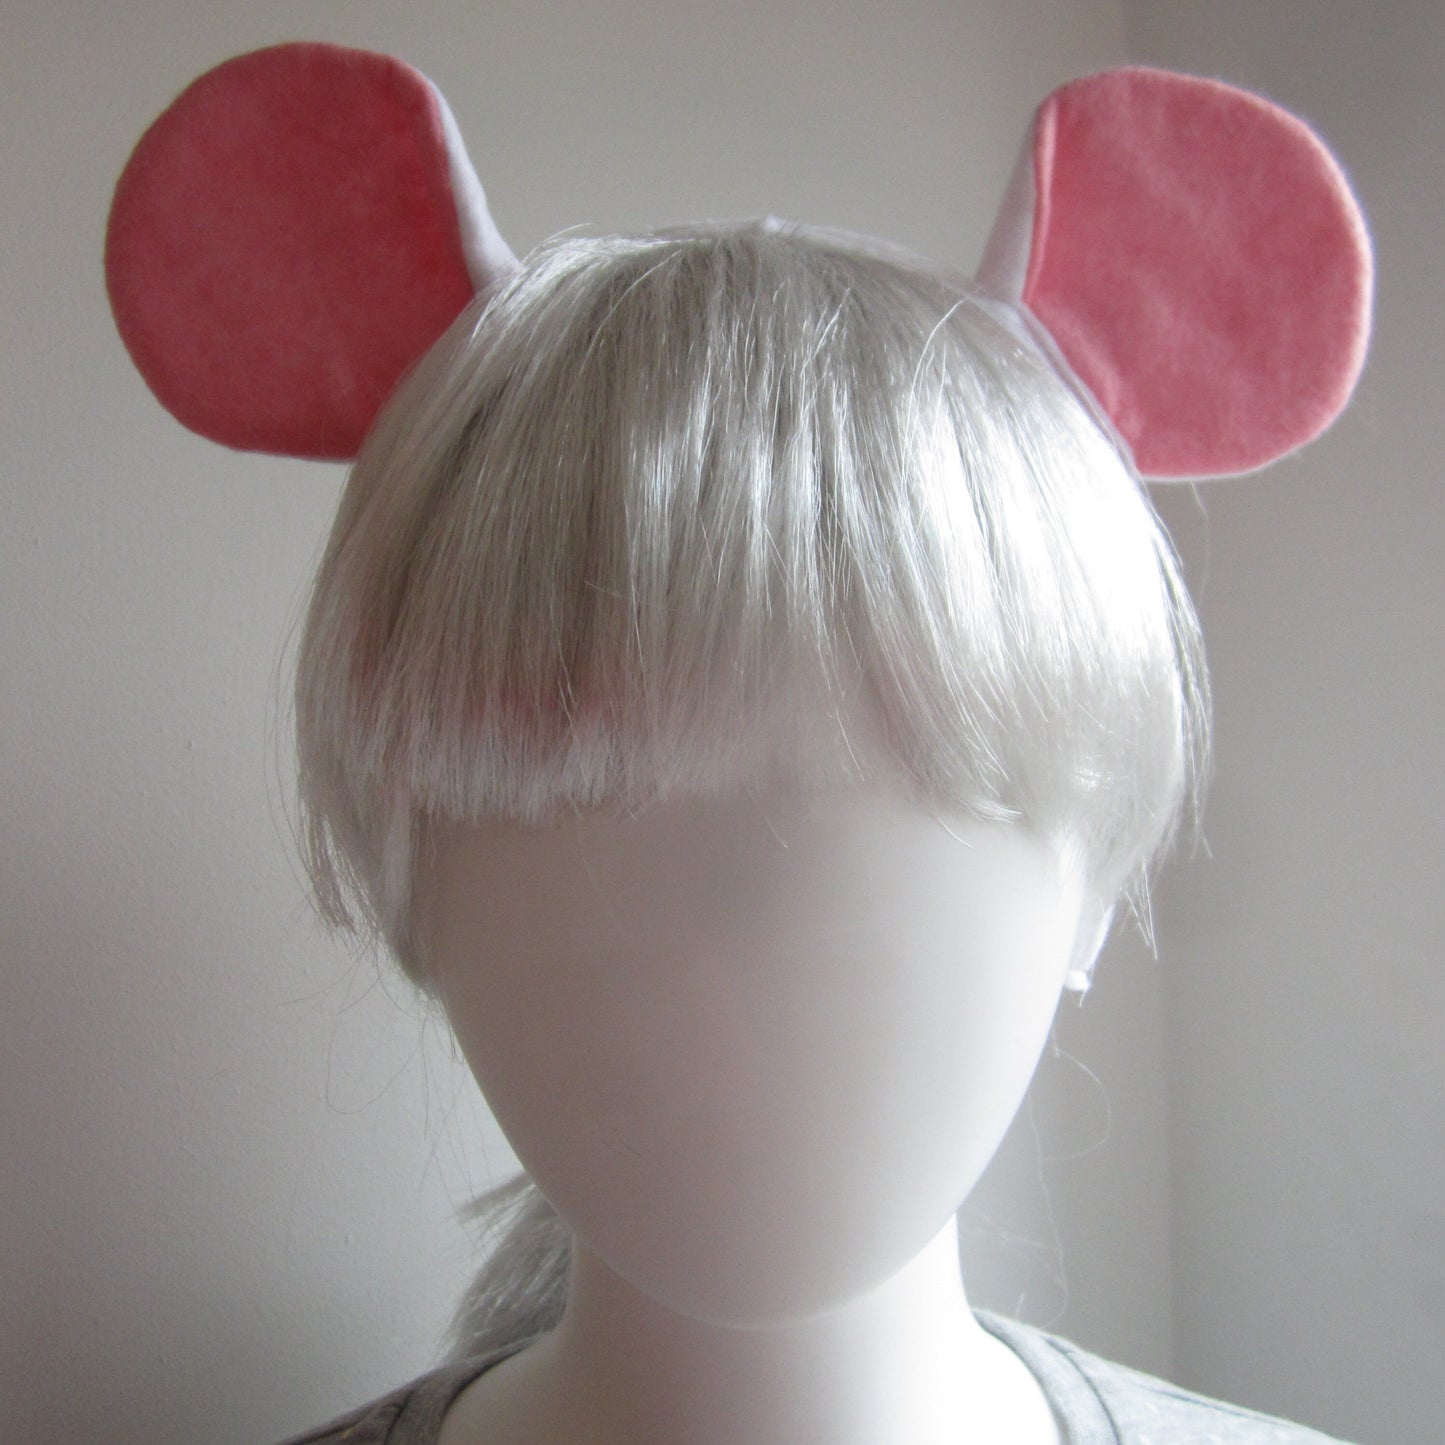 Mouse Ears Hairband with Extra Large Mouse Ears Made of White Felt